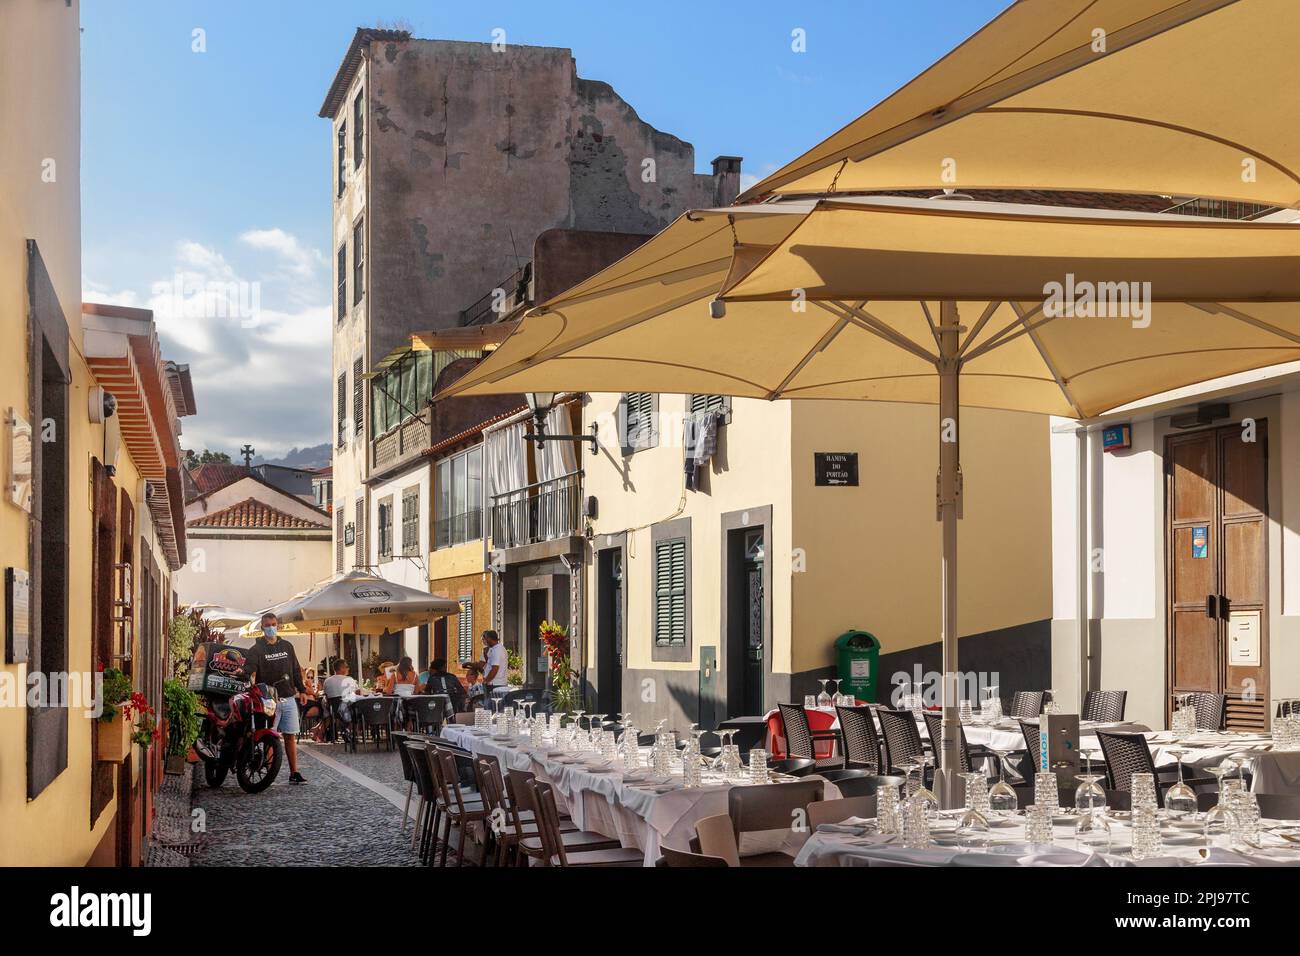 FUNCHAL, PORTUGAL - AUGUST 20, 2021: This is a lot of cafes and restaurants waiting and receiving guests in the narrow streets in the old seaside area Stock Photo